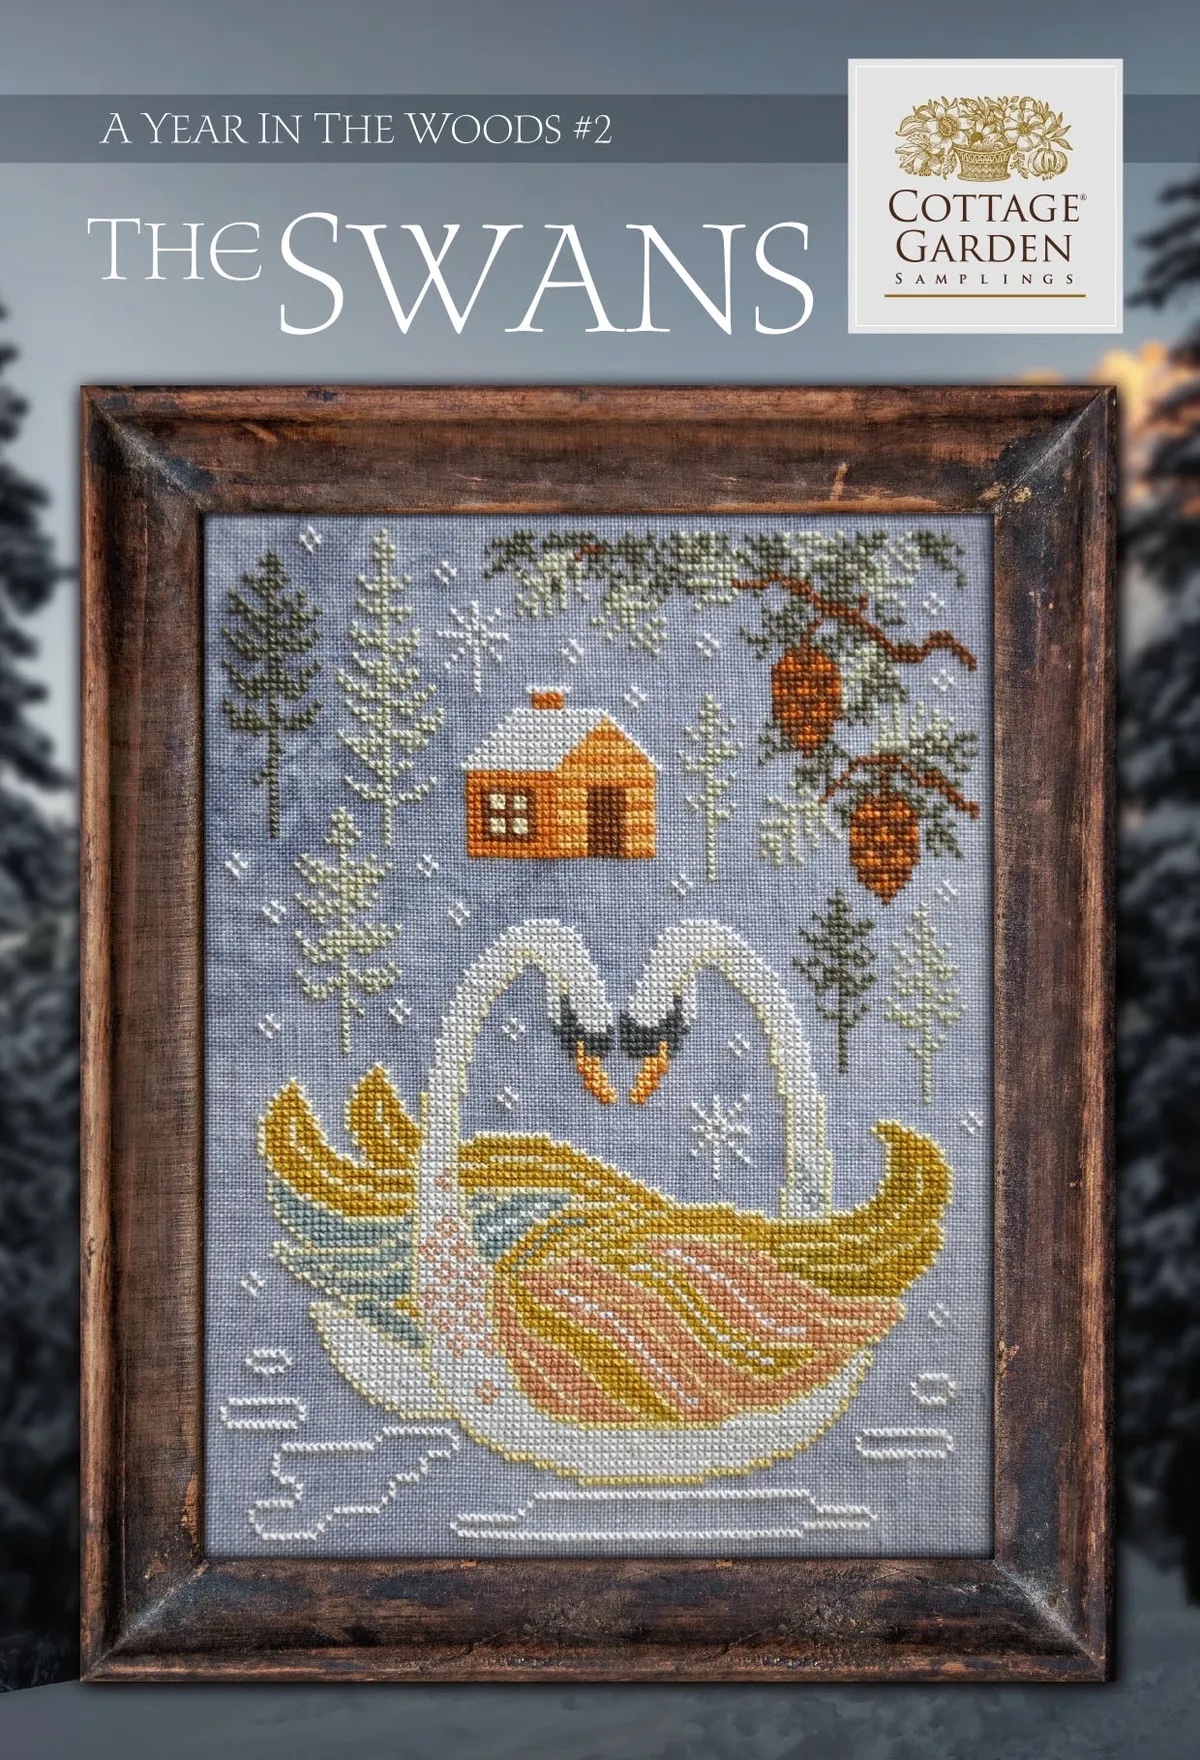 The Swans (2/12) - A Year In The Woods